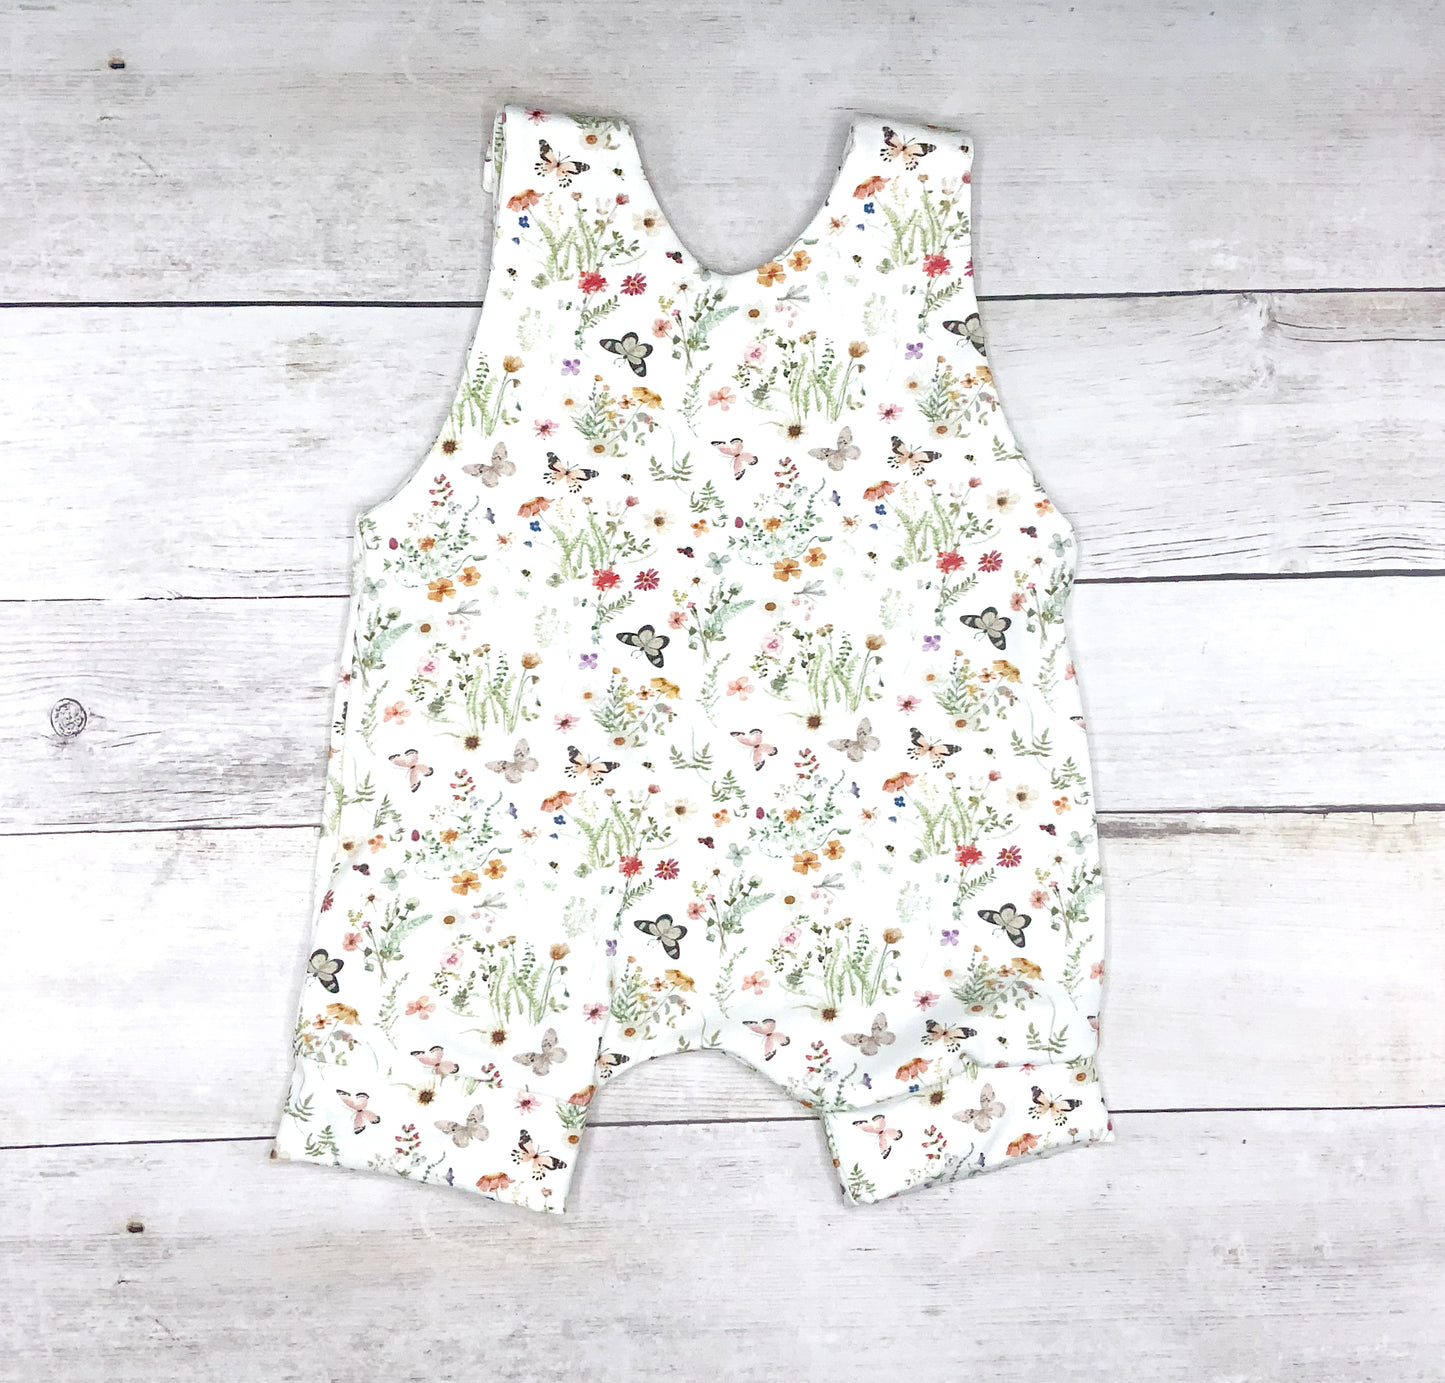 Butterfly & Floral Print  Short Romper, Organic Cotton, Girls Summer Outfit